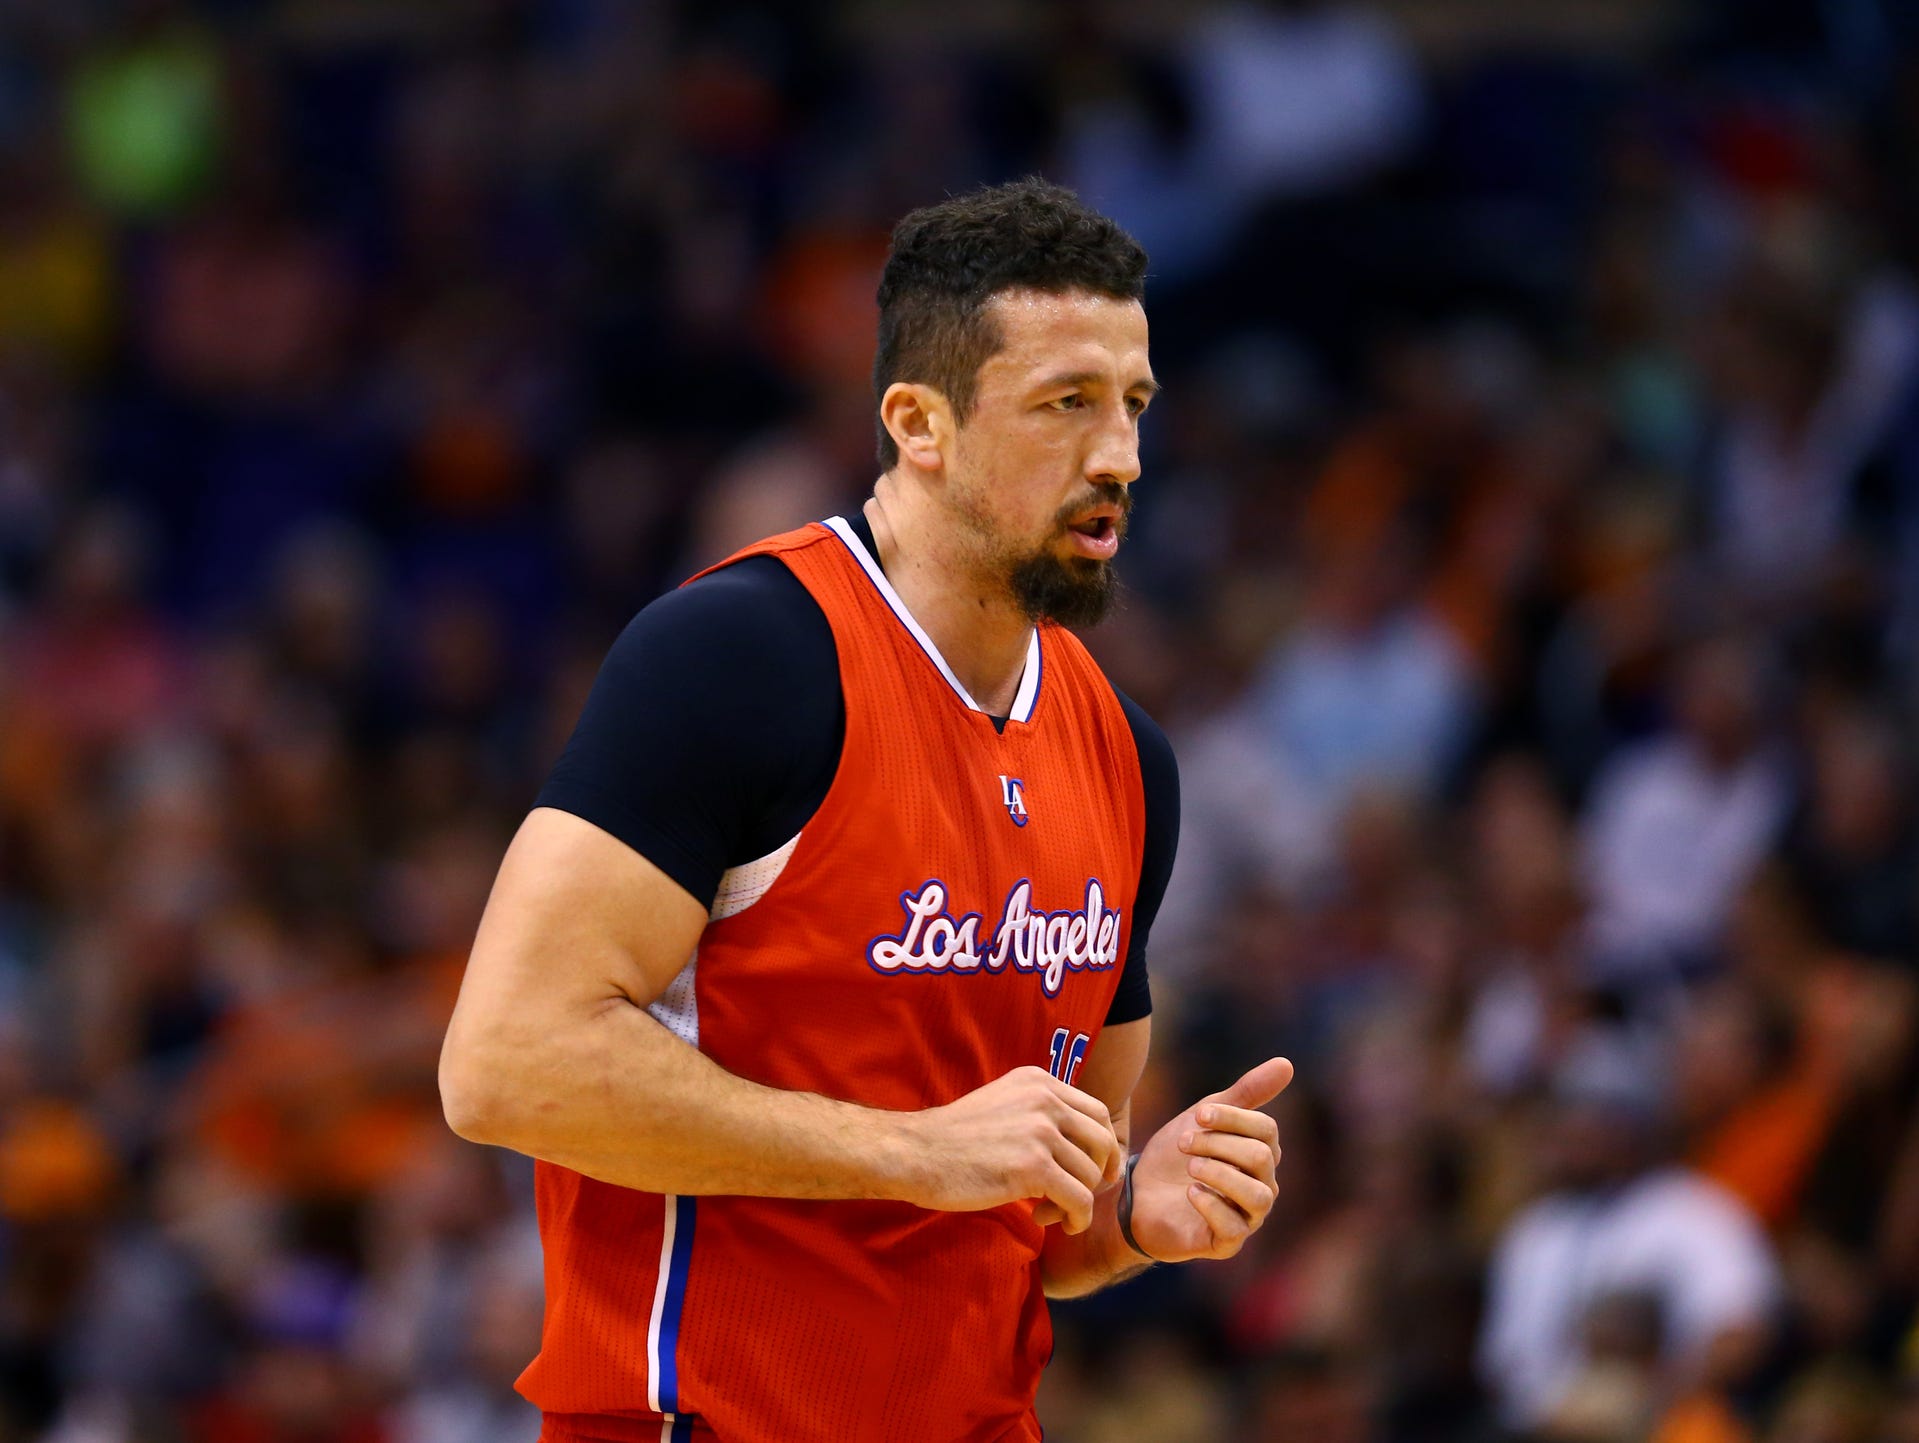 Hedo Turkoglu, Los Angeles Clippers | He played 25